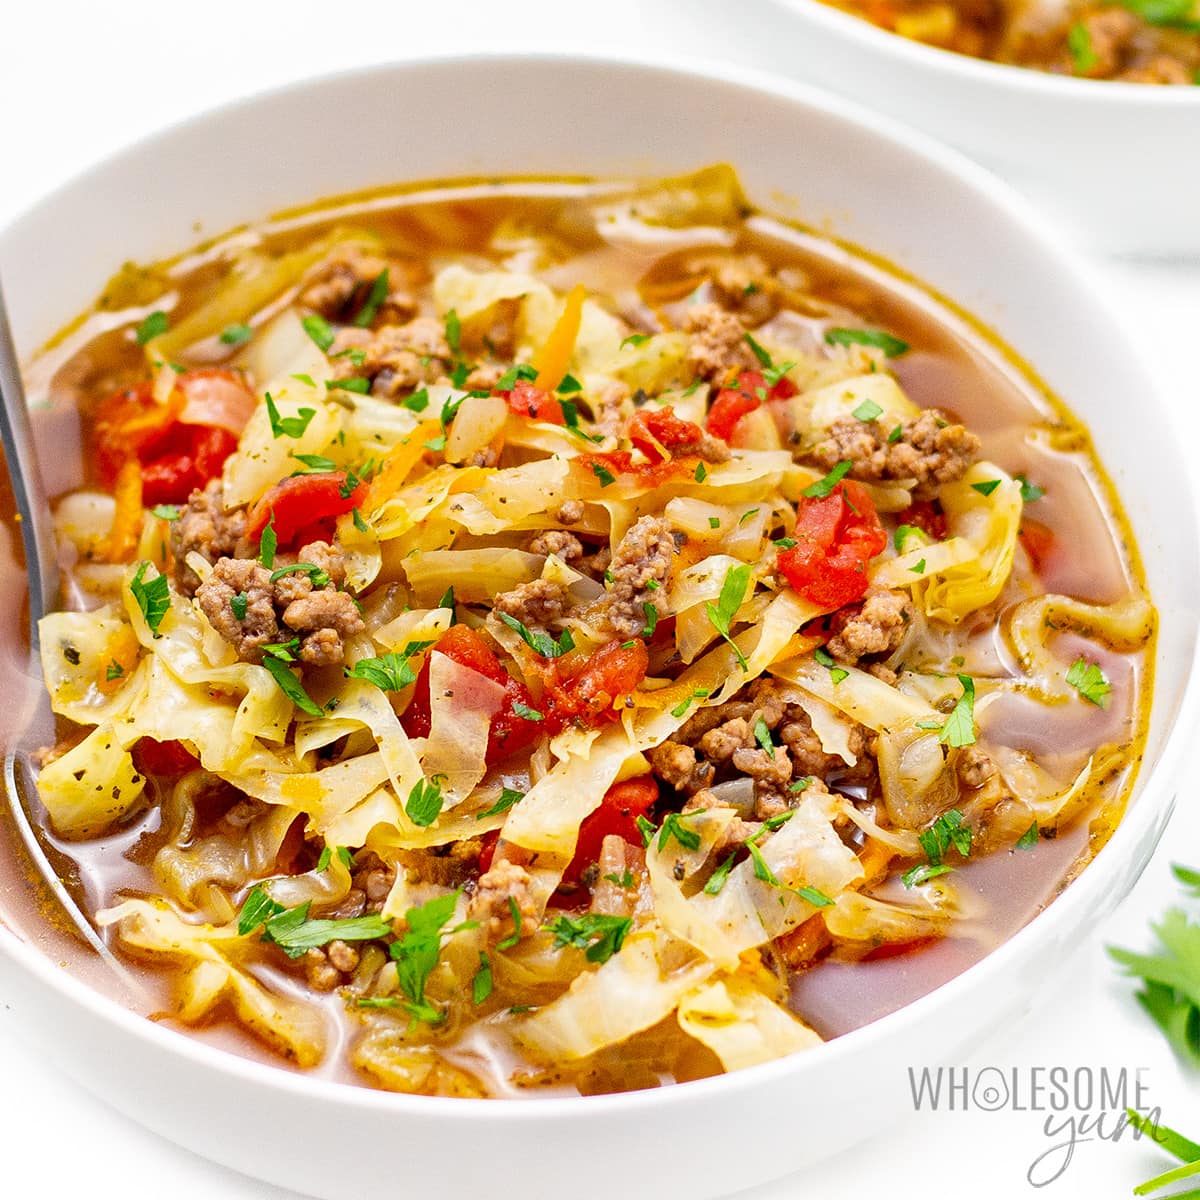 Cabbage Soup With Hamburger (Ground Beef) | Wholesome Yum | Easy healthy recipes. 10 ingredients or less.